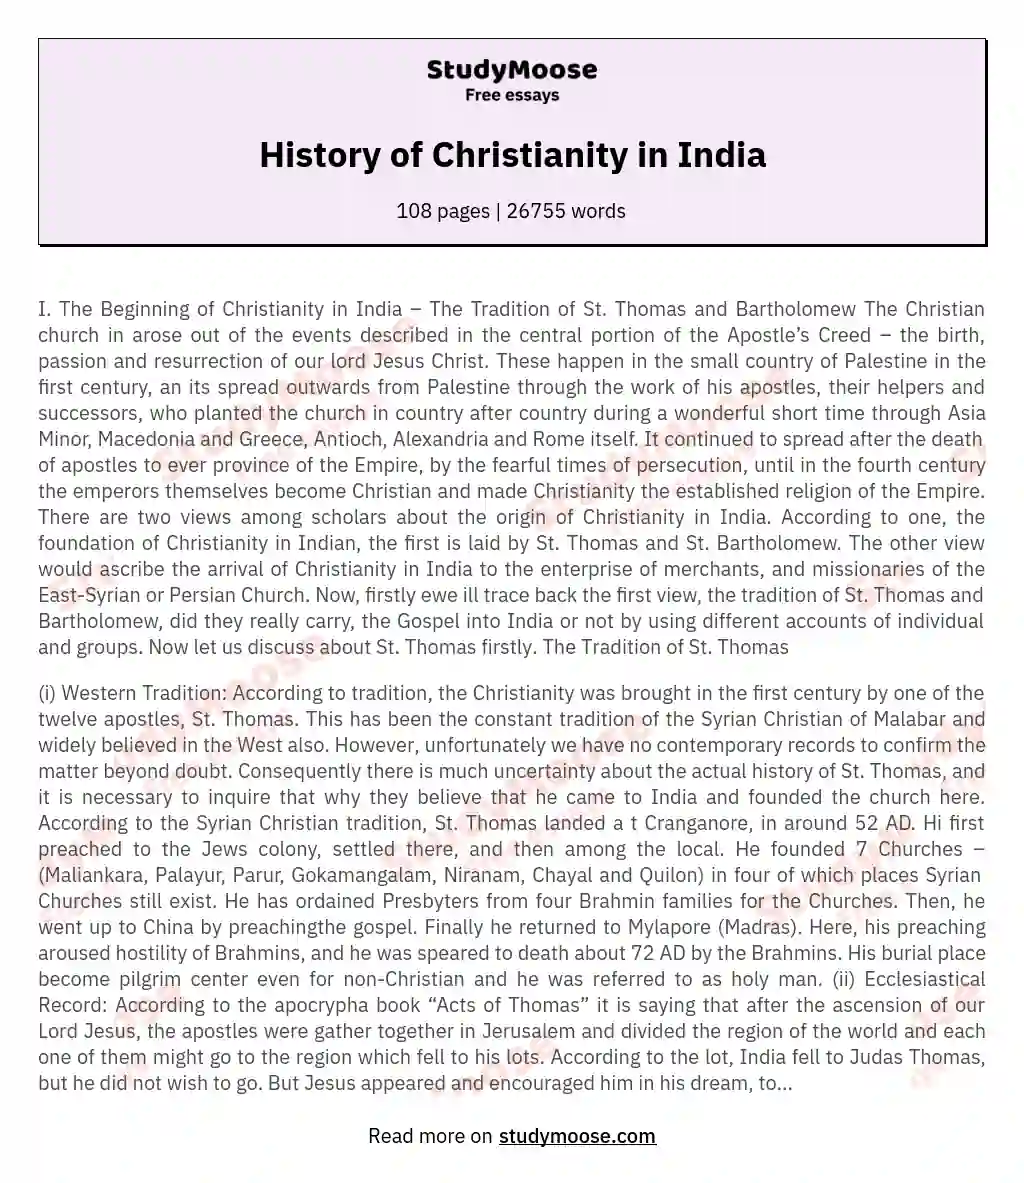 History of Christianity in India essay